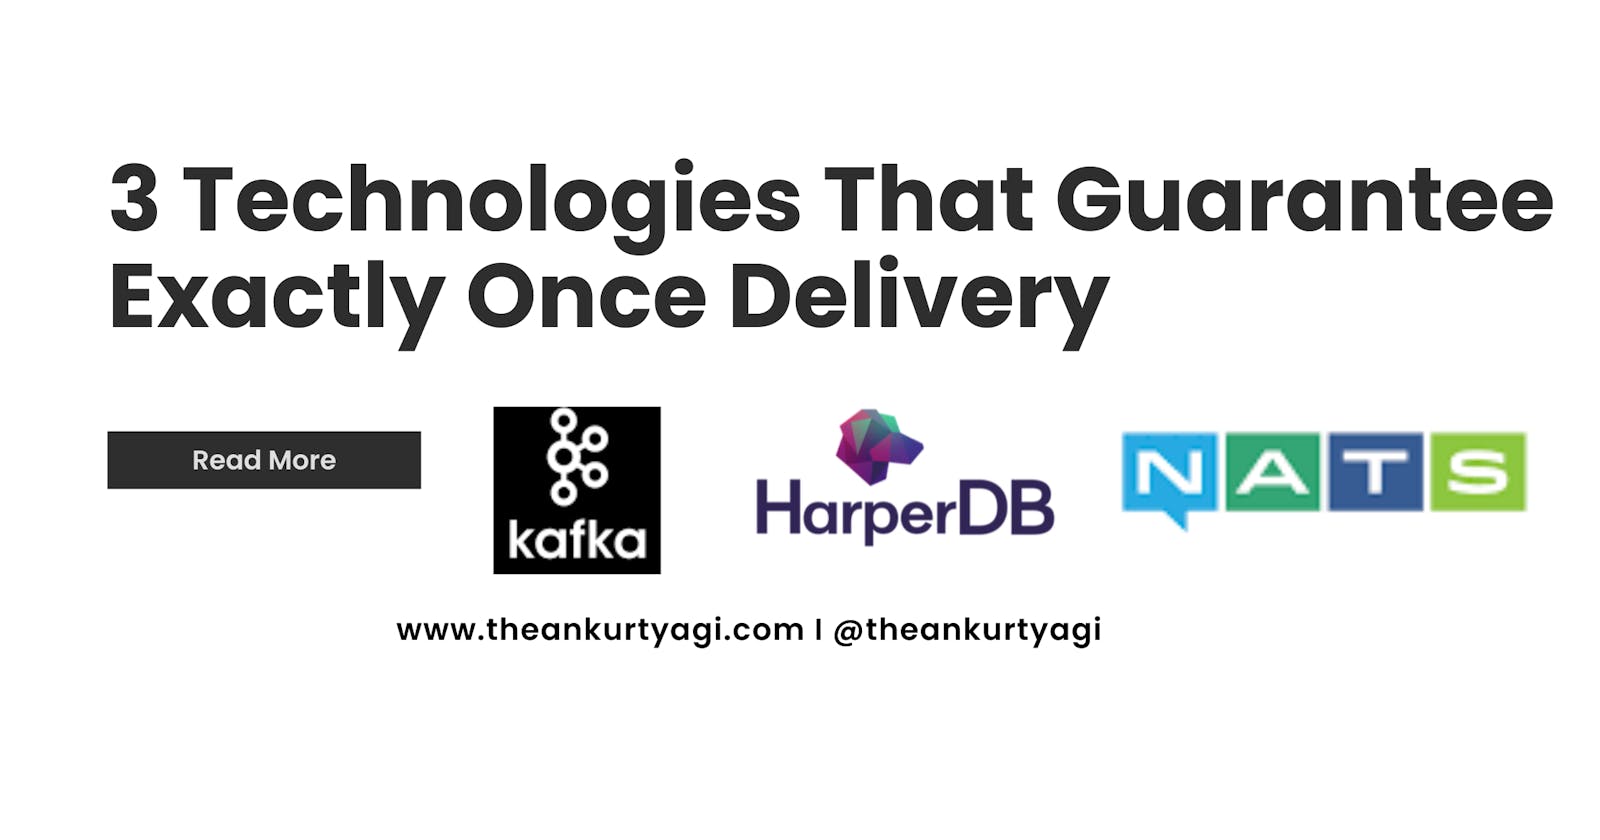 3 Technologies That Guarantee Exactly Once Delivery